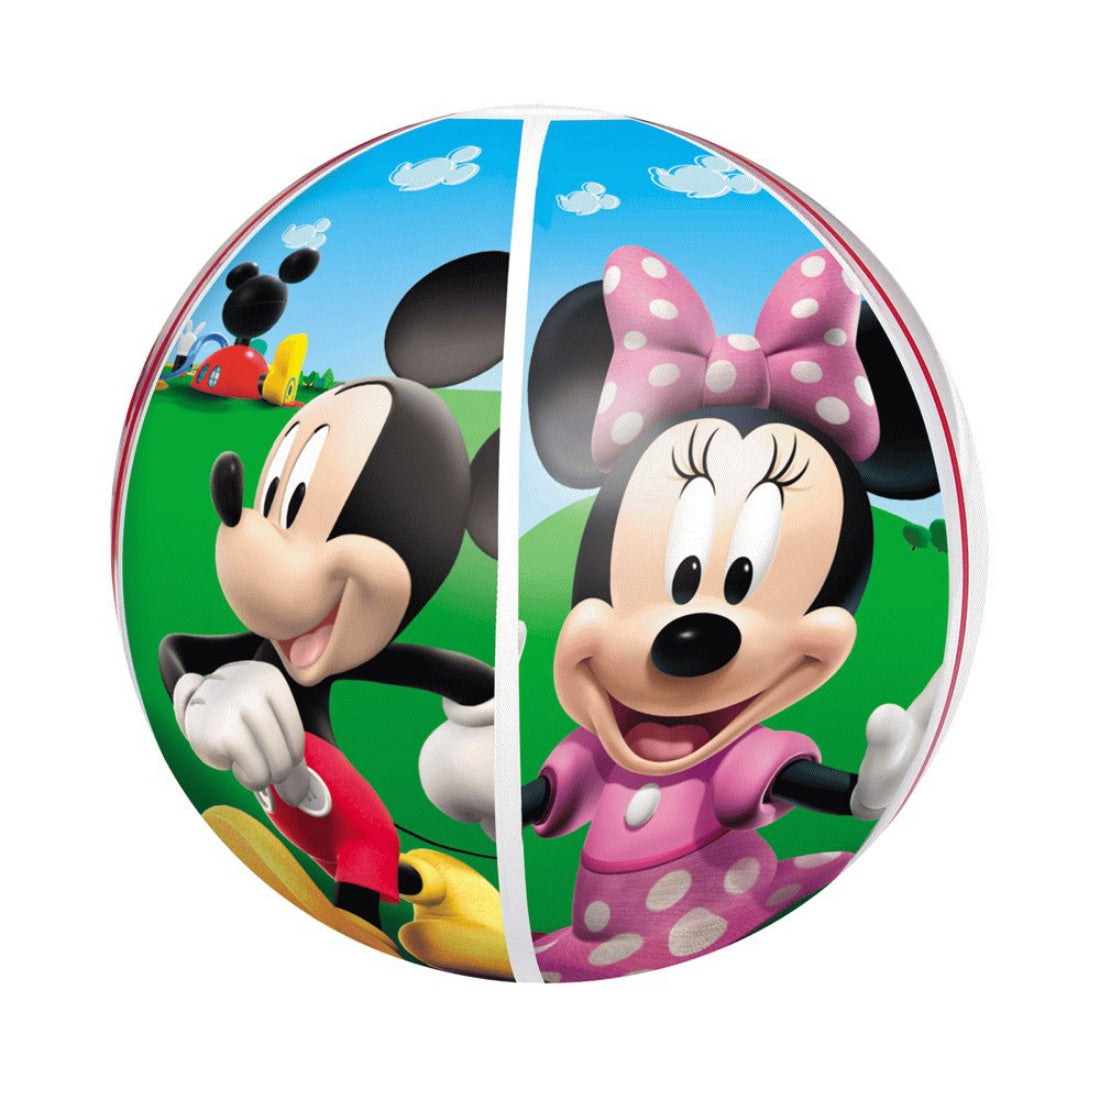 Bestway Mickey Mouse Club Beach Ball For Kids